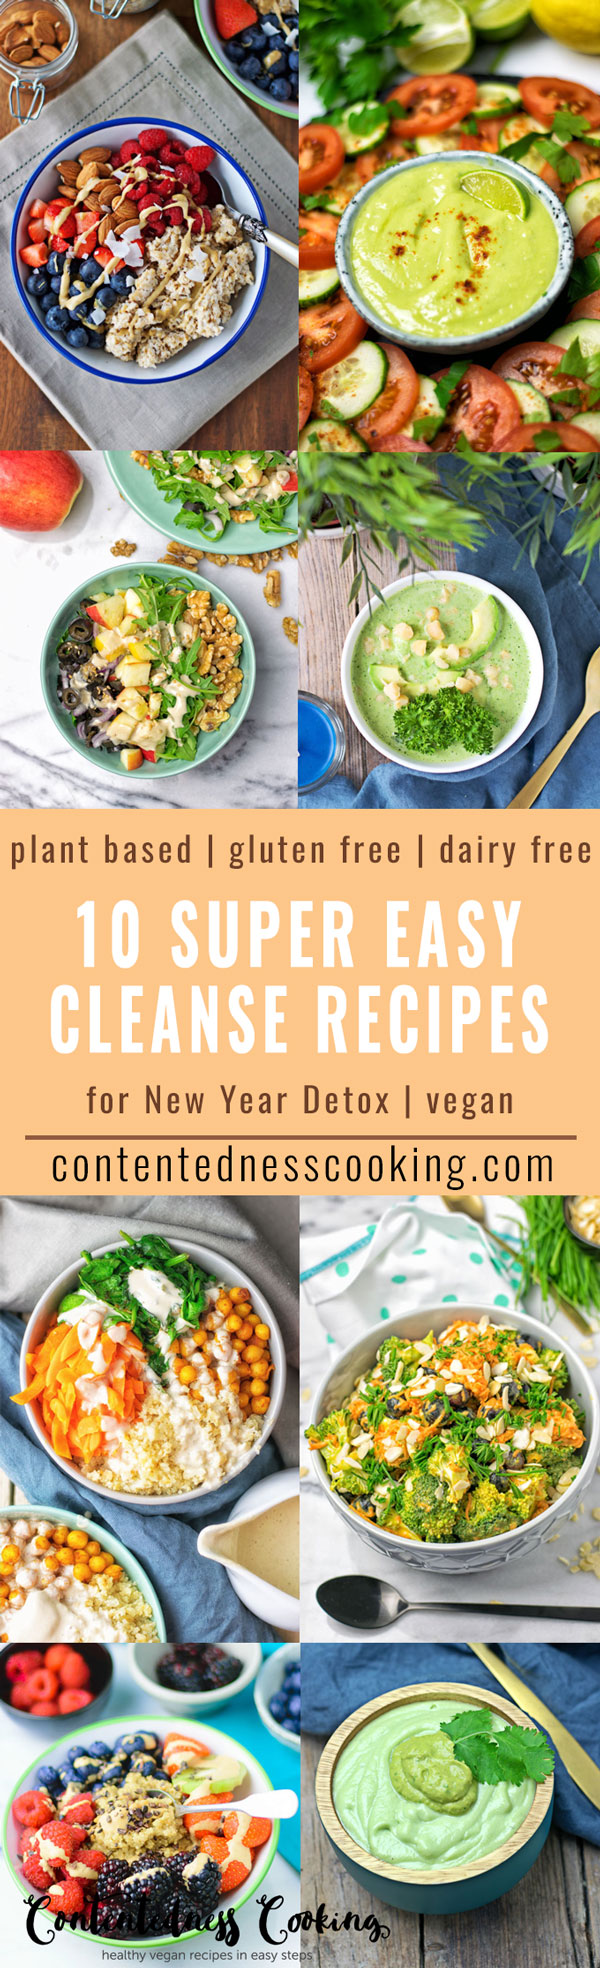 10 Easy Cleanse Recipes for New Year Detox